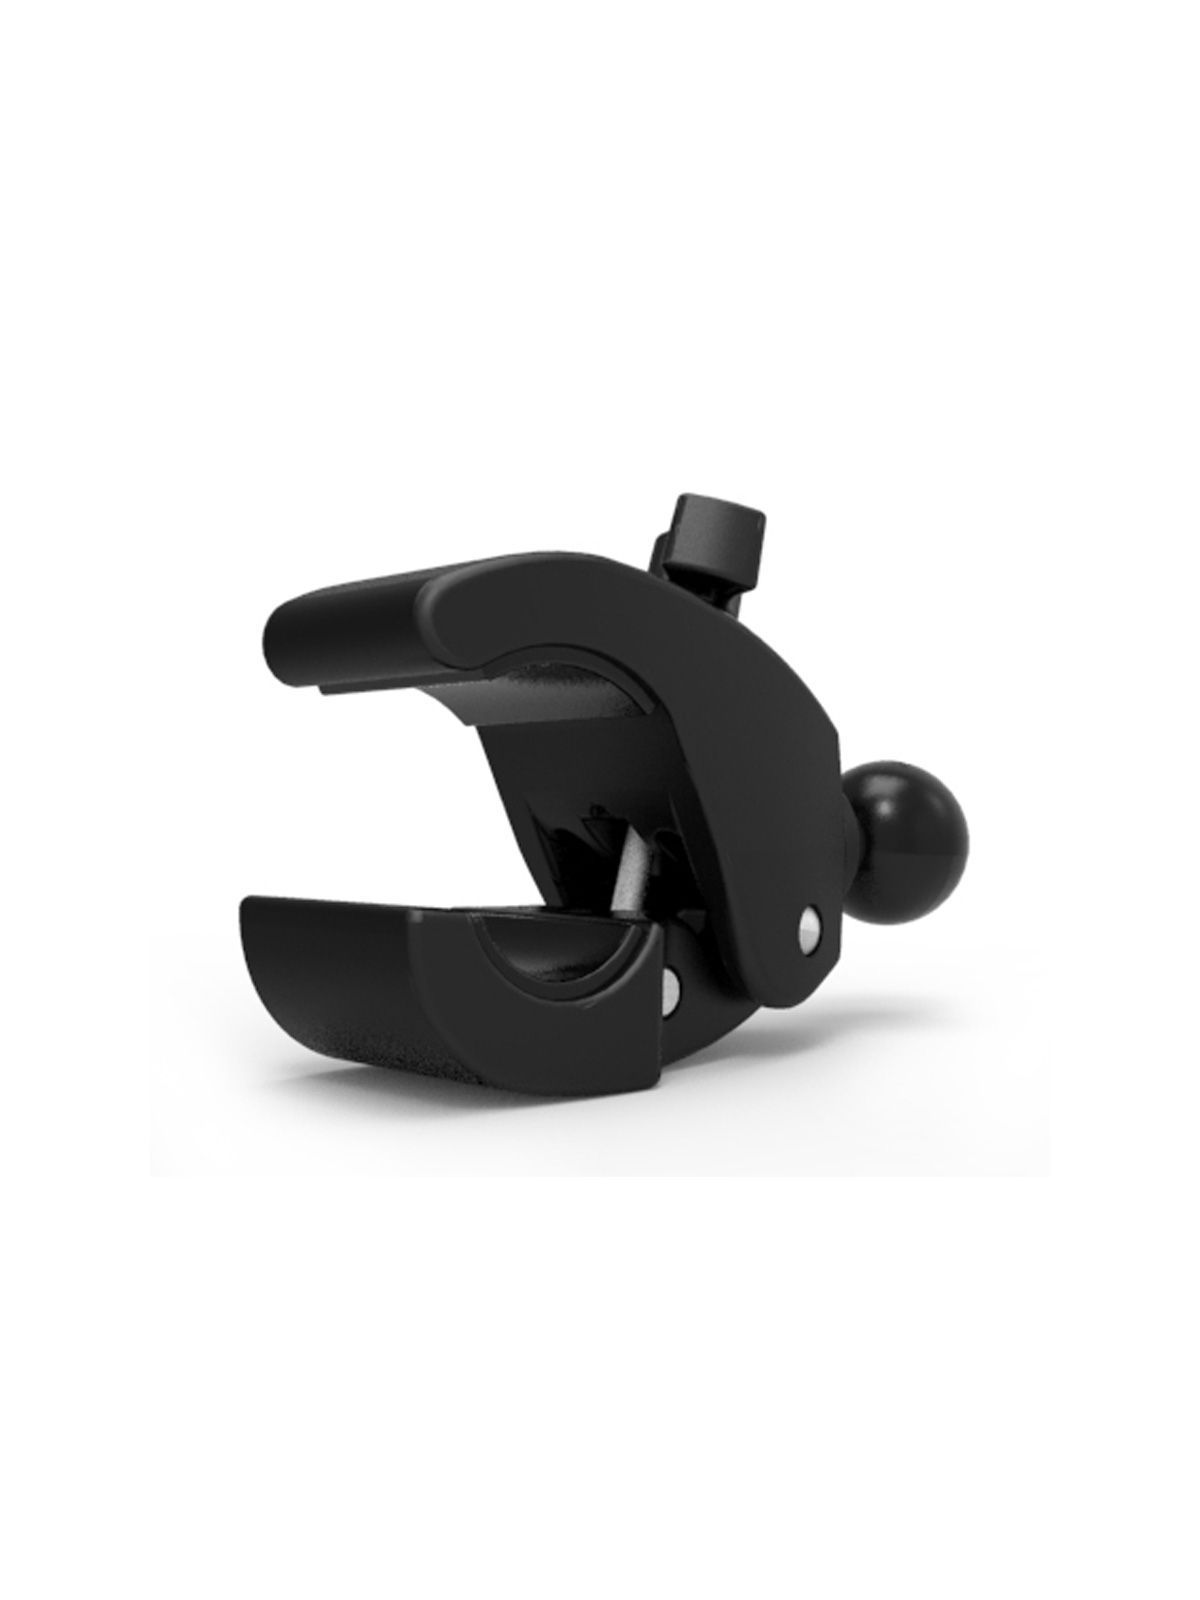 RAM MOUNTS Large Tough-Claw with C-Ball (1.5")